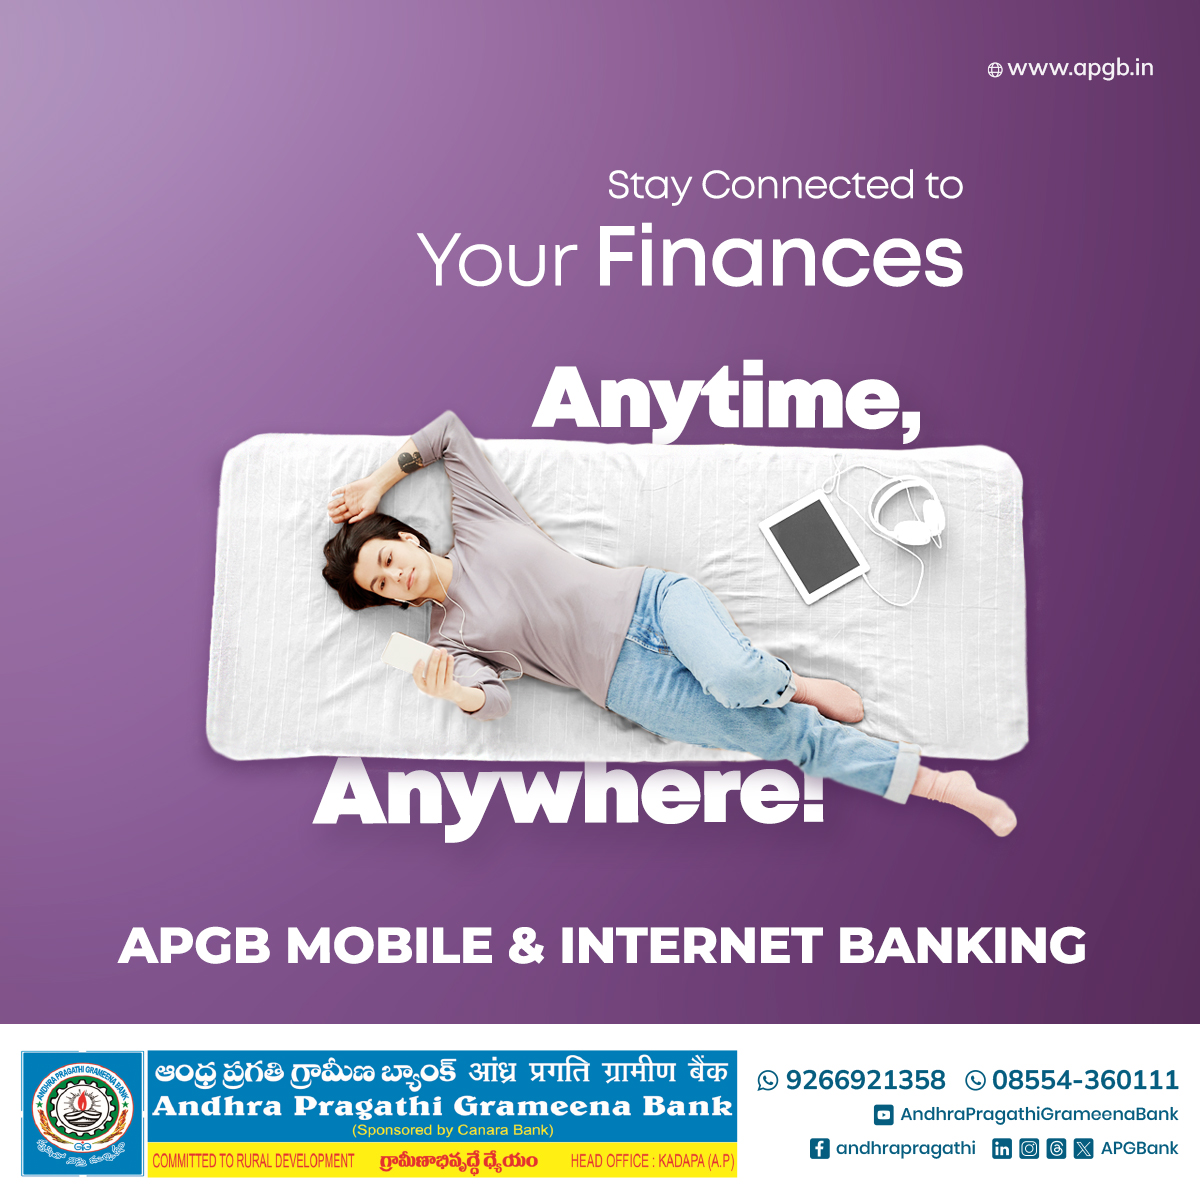 Stay Connected to Your Finances
Anytime, Anywhere

APGB Mobile & Internet Banking

#andhrapragathigrameenabank #apgb #mobilebanking #internetbanking #easybanking #banking